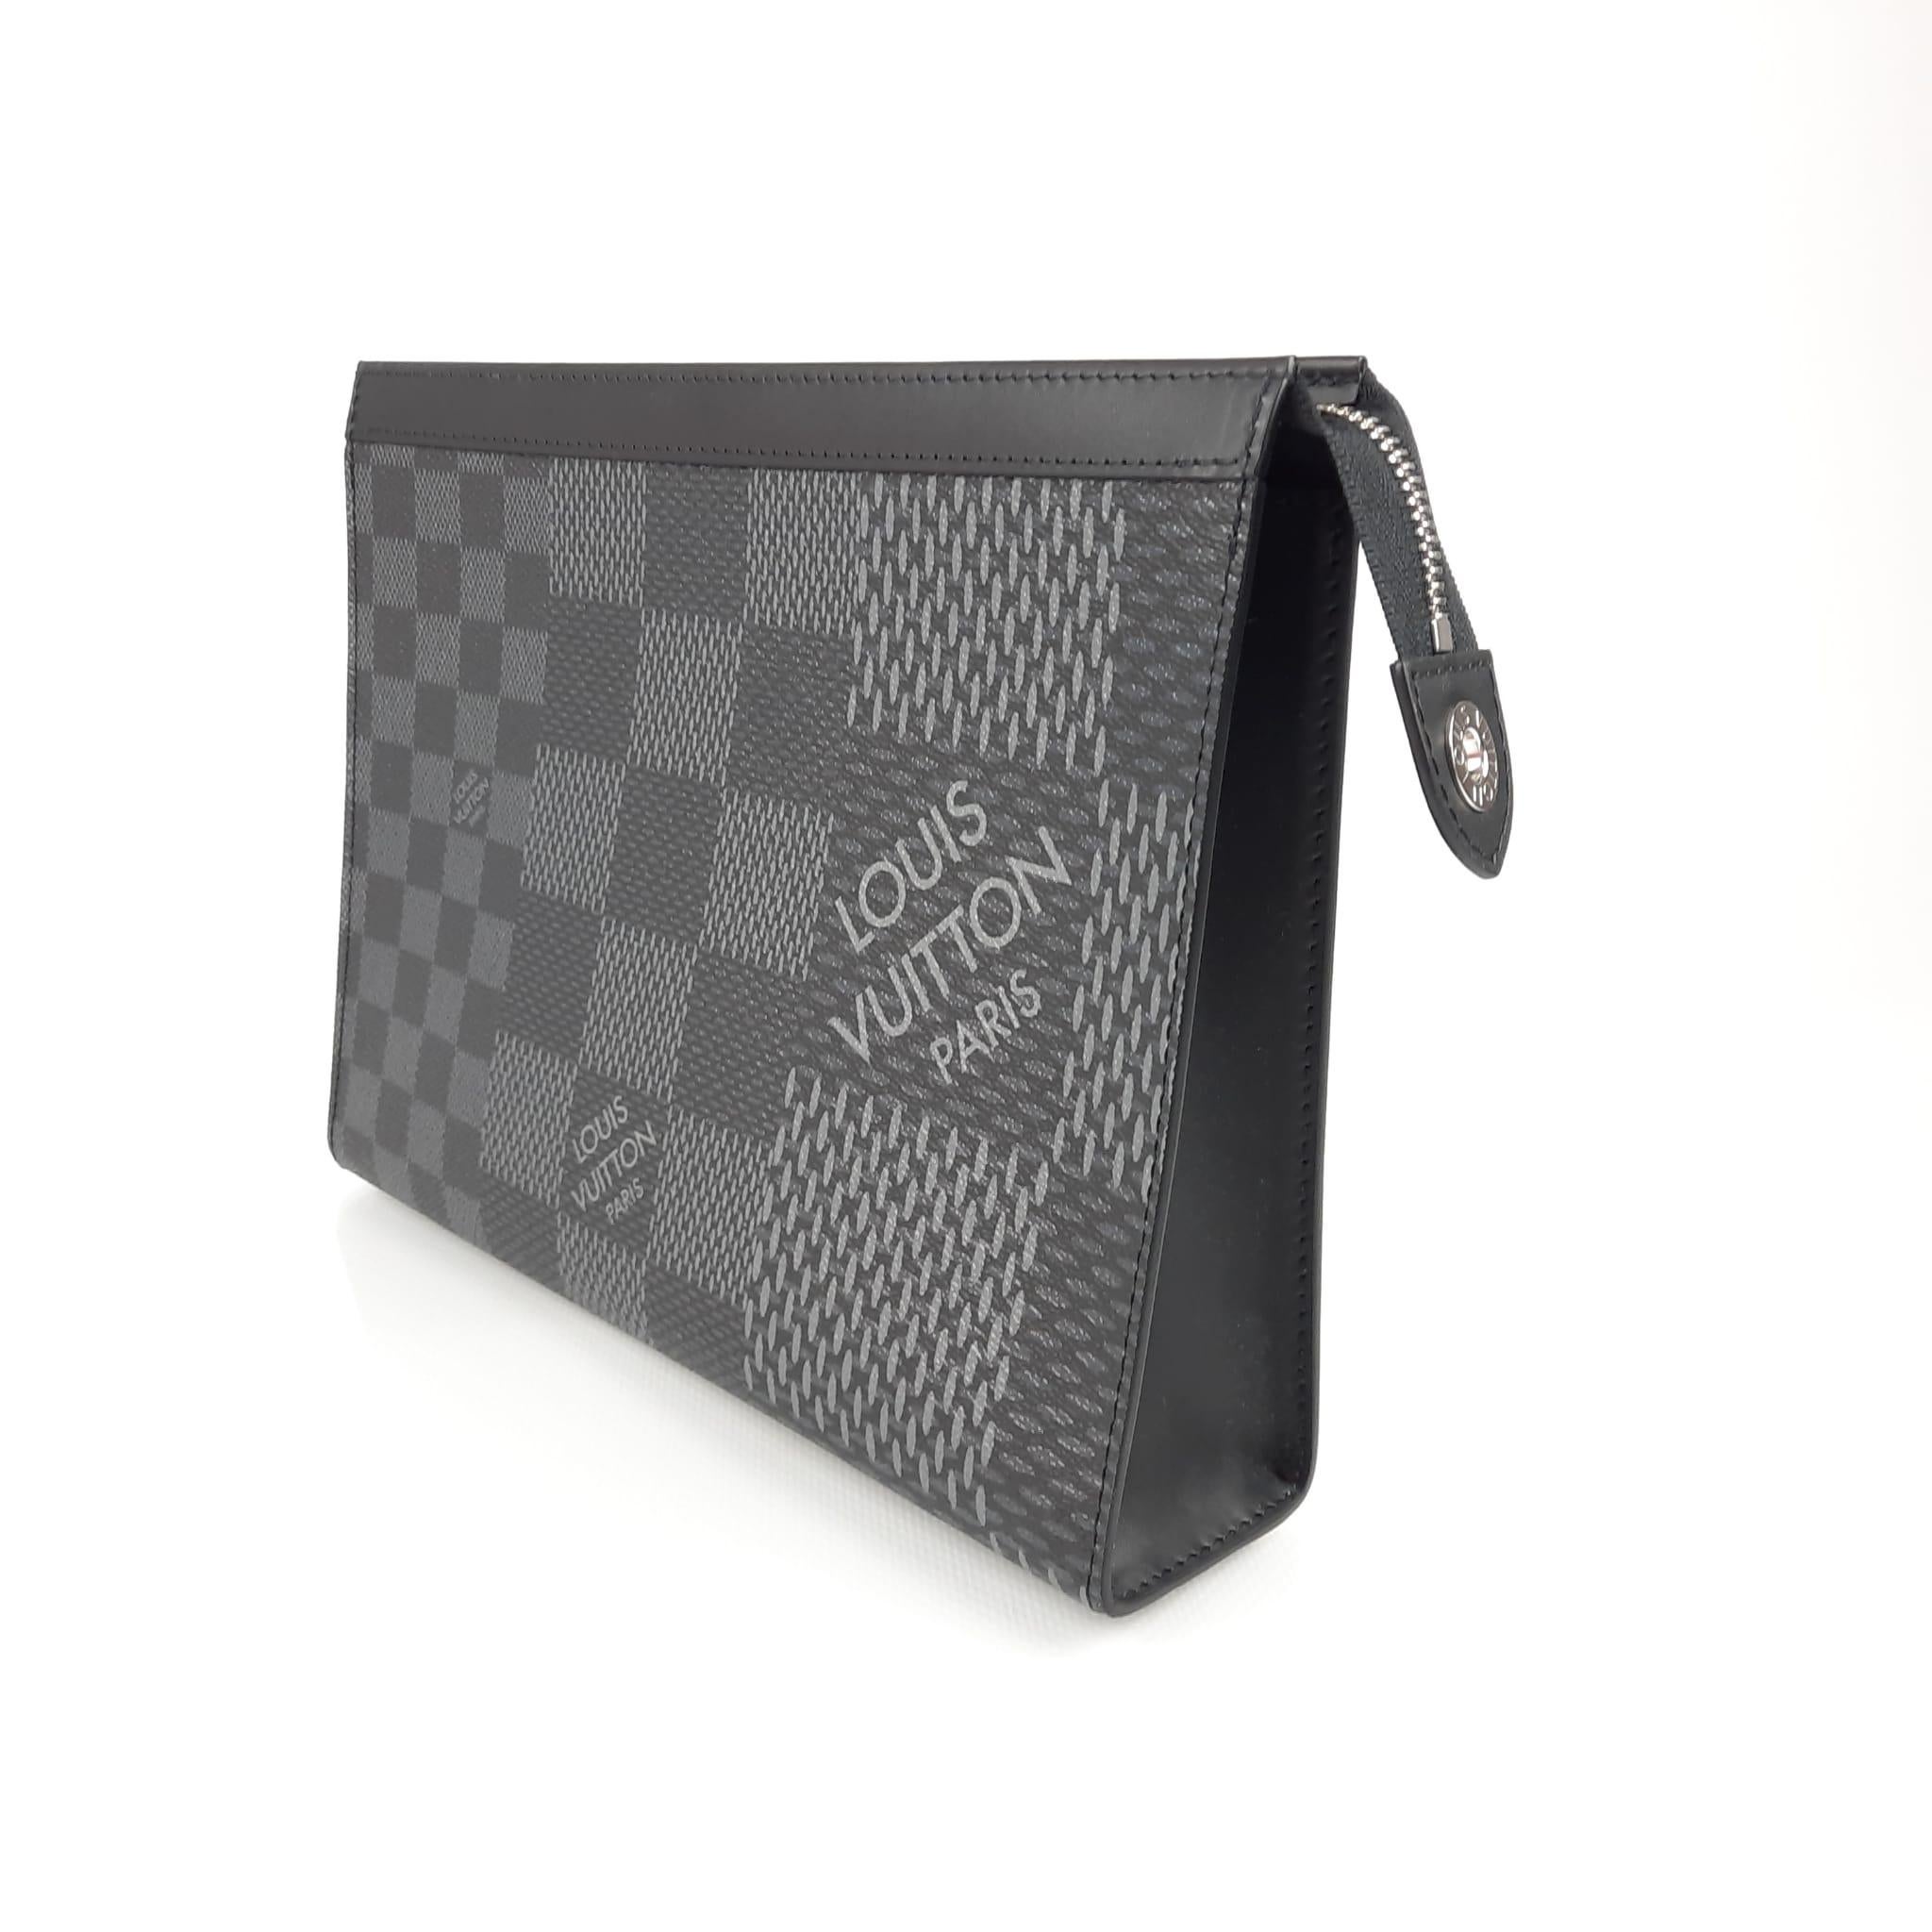 Sleek and contemporary, this Voyage clutch comes in Damier Graphite 3D canvas, an original interpretation of Louis Vuitton's signature checkered canvas in a classic shade of gray. With a large main compartment and six card slots, this innovative